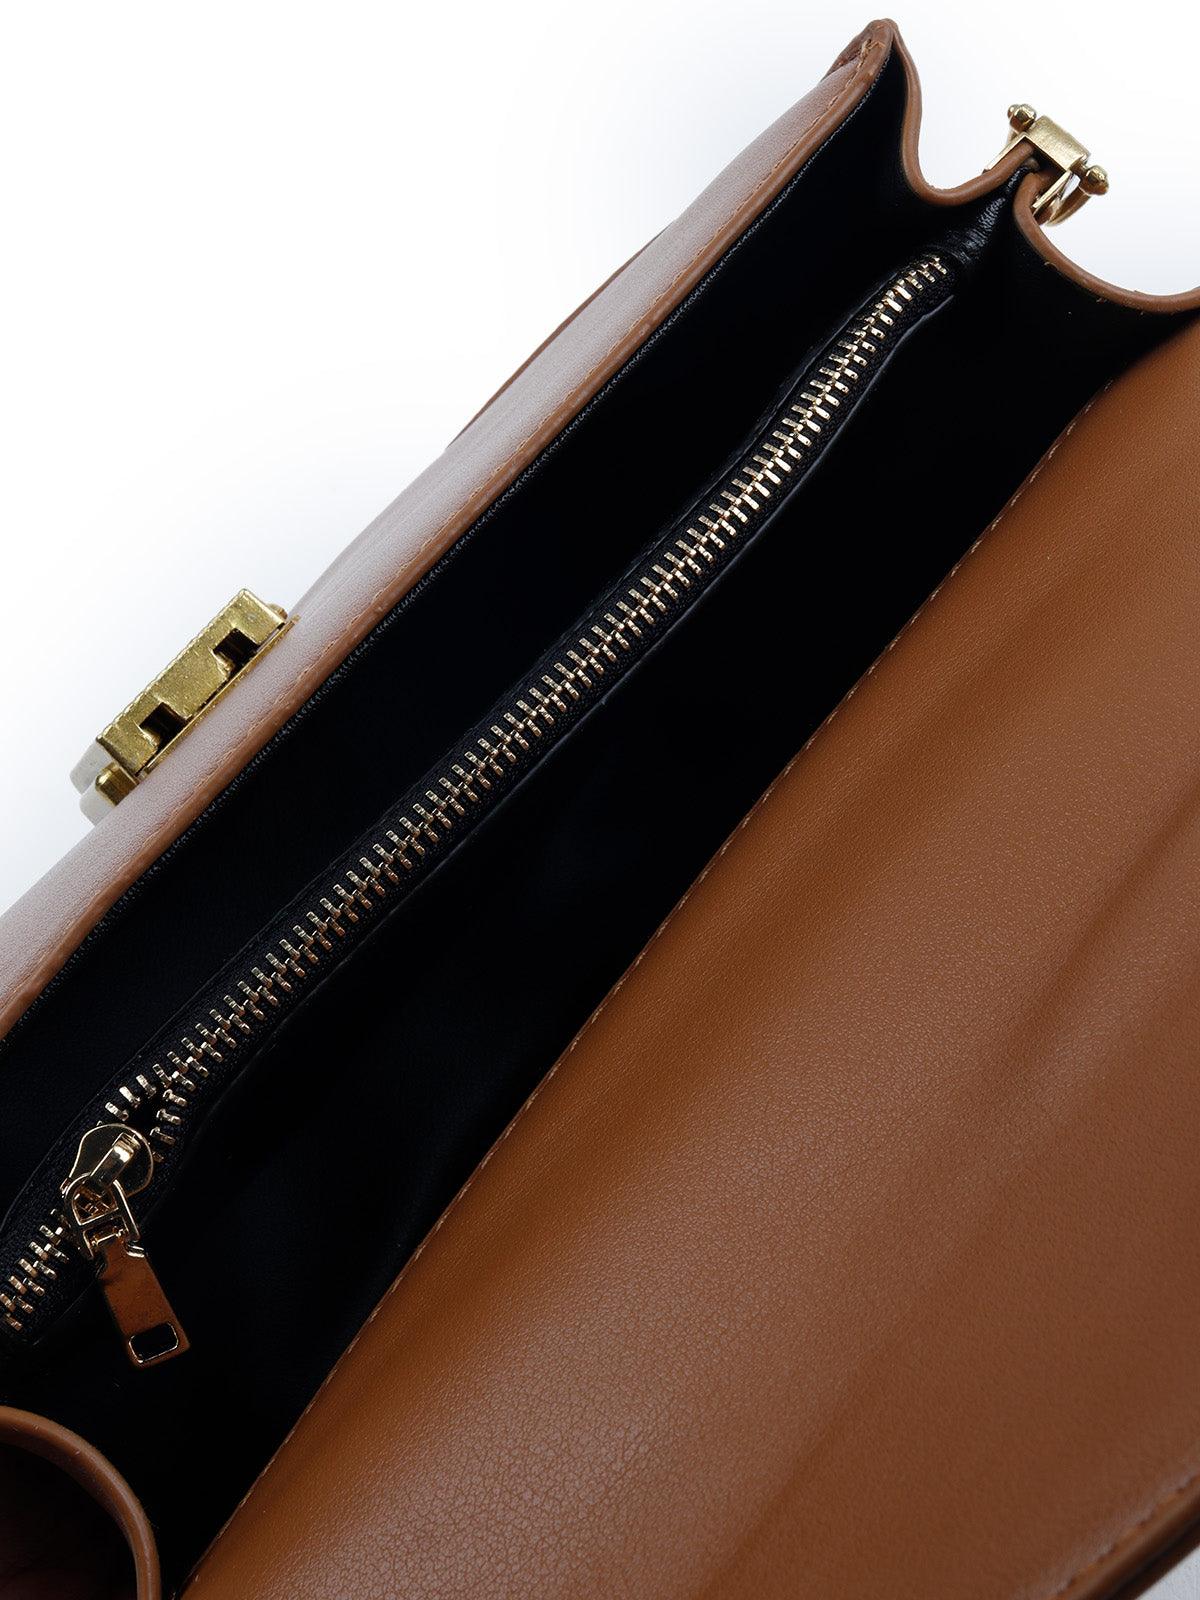 THE VERY STYLISH BROWN CLUTCH BAG - Odette